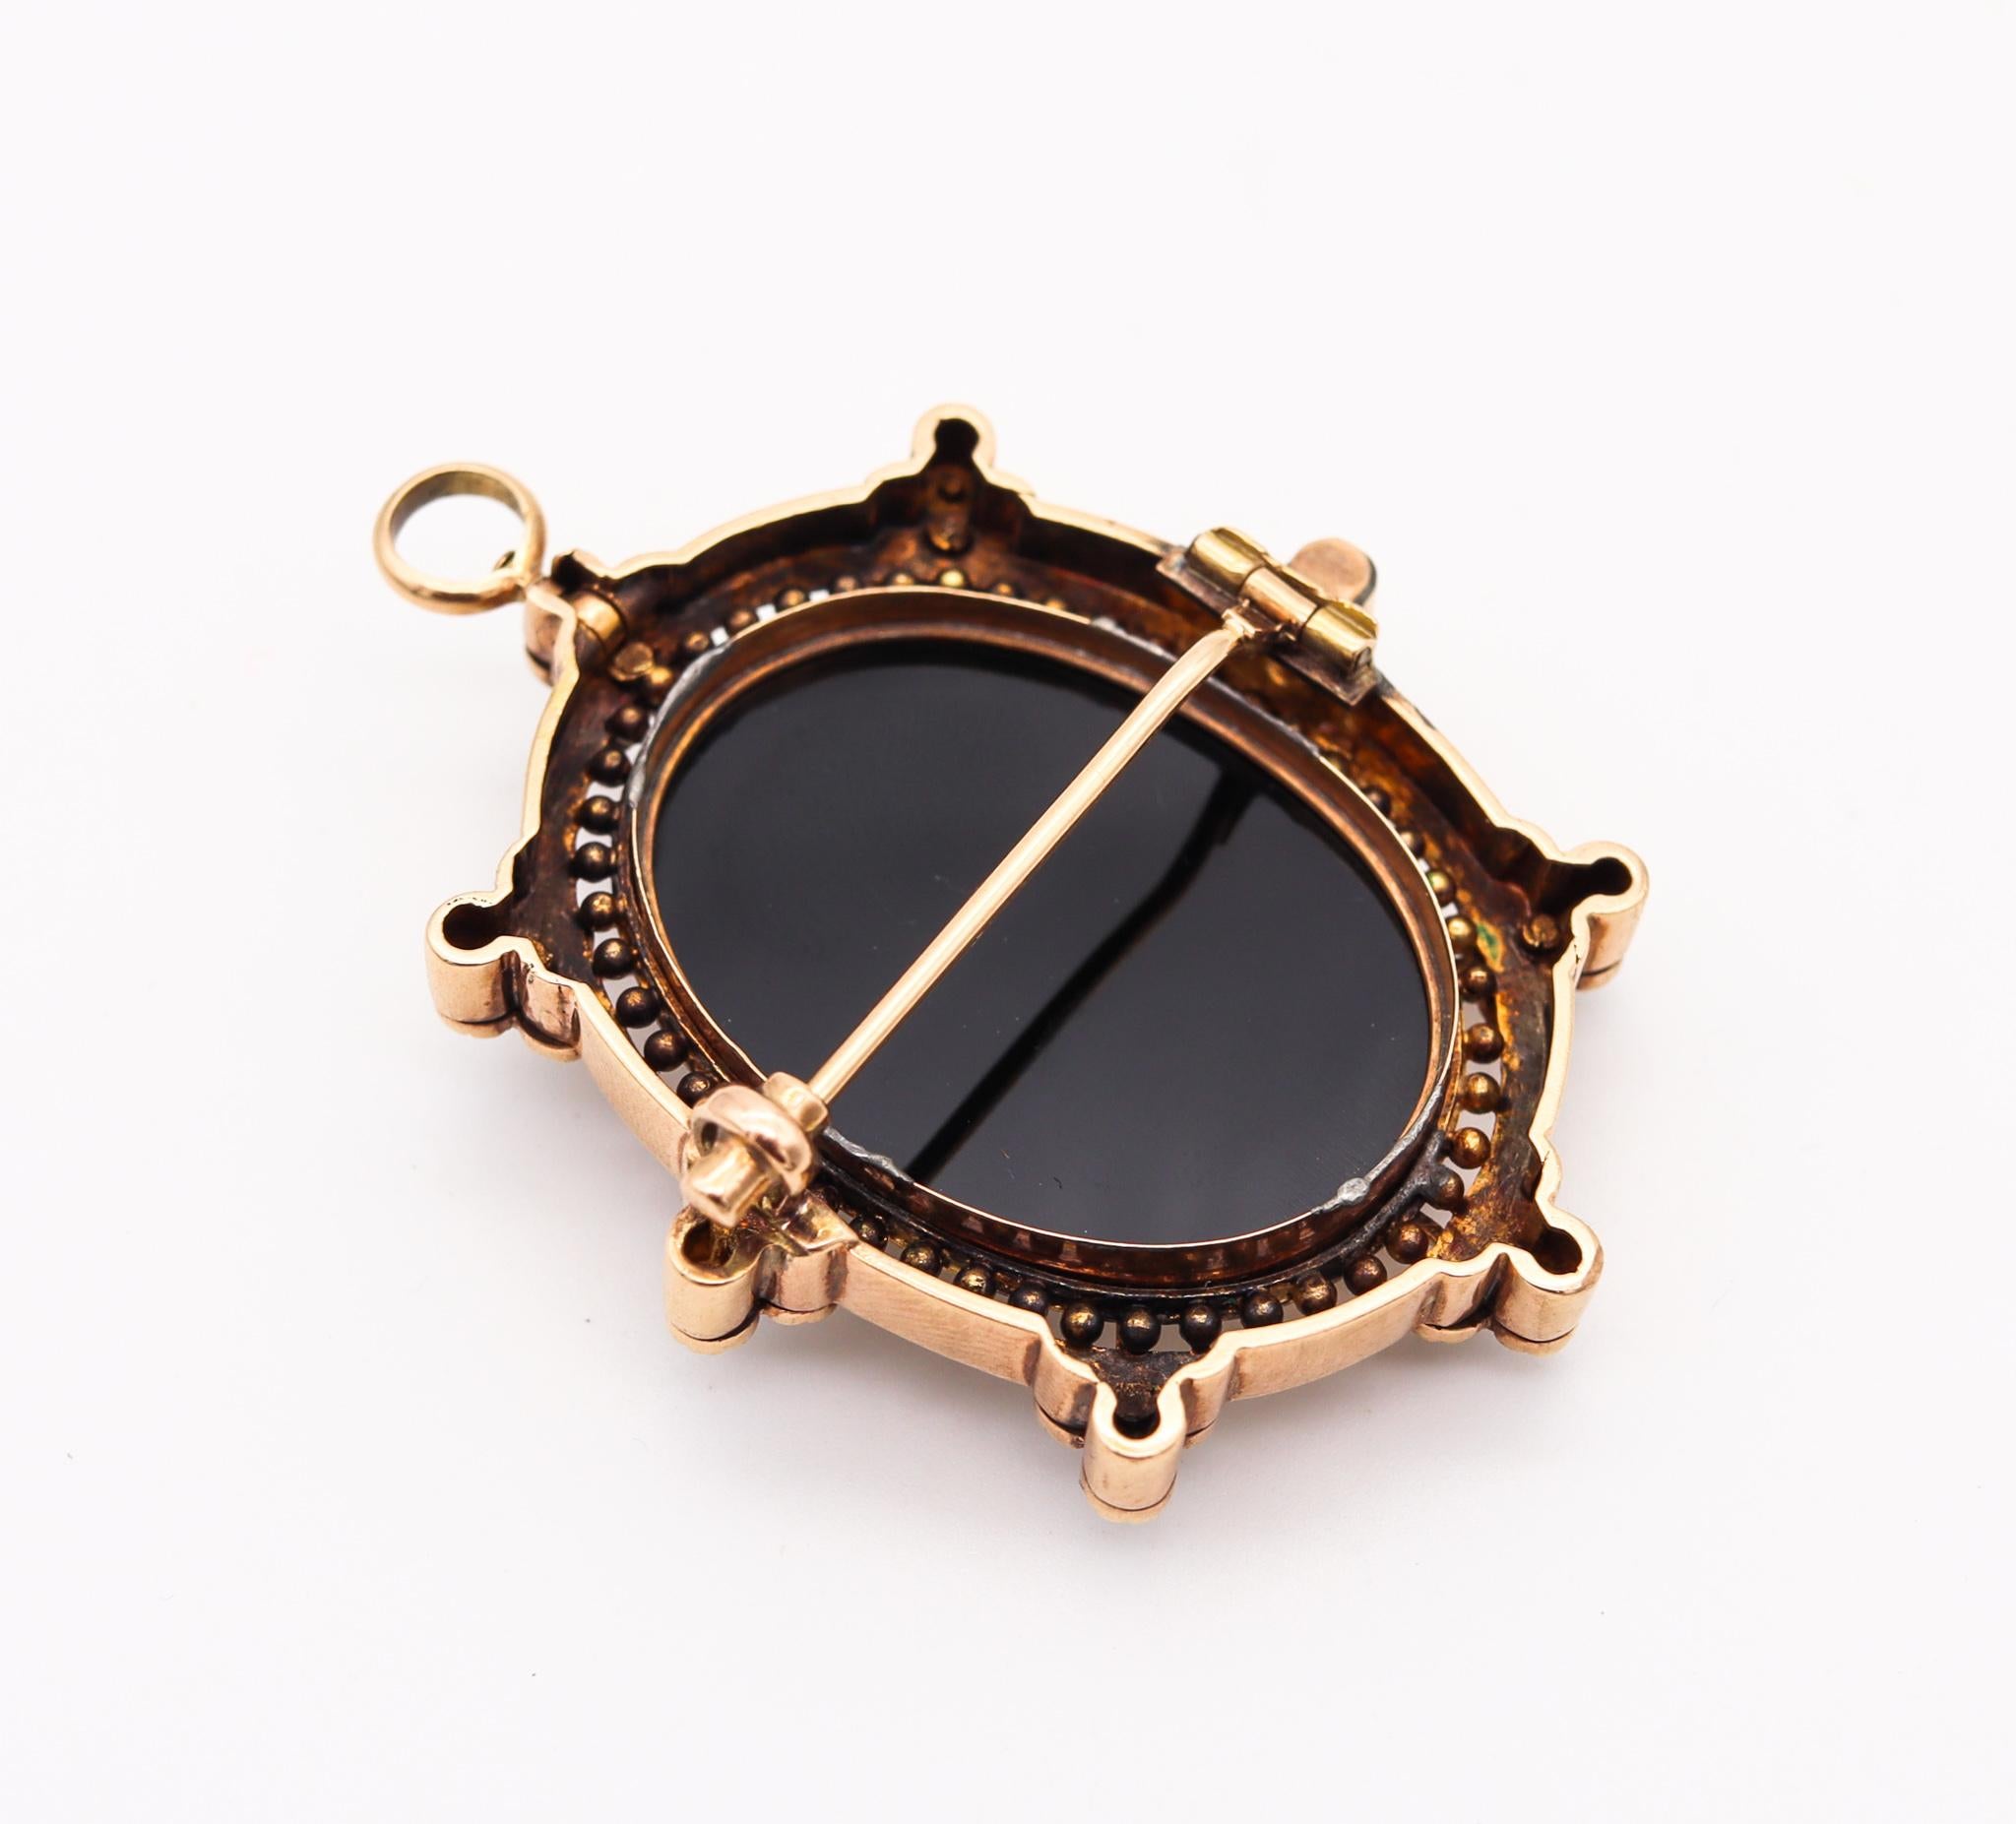 Cabochon Victorian 1870 Etruscan Revival Agate Cameo Pendant In 15KT Gold Natural Pearls